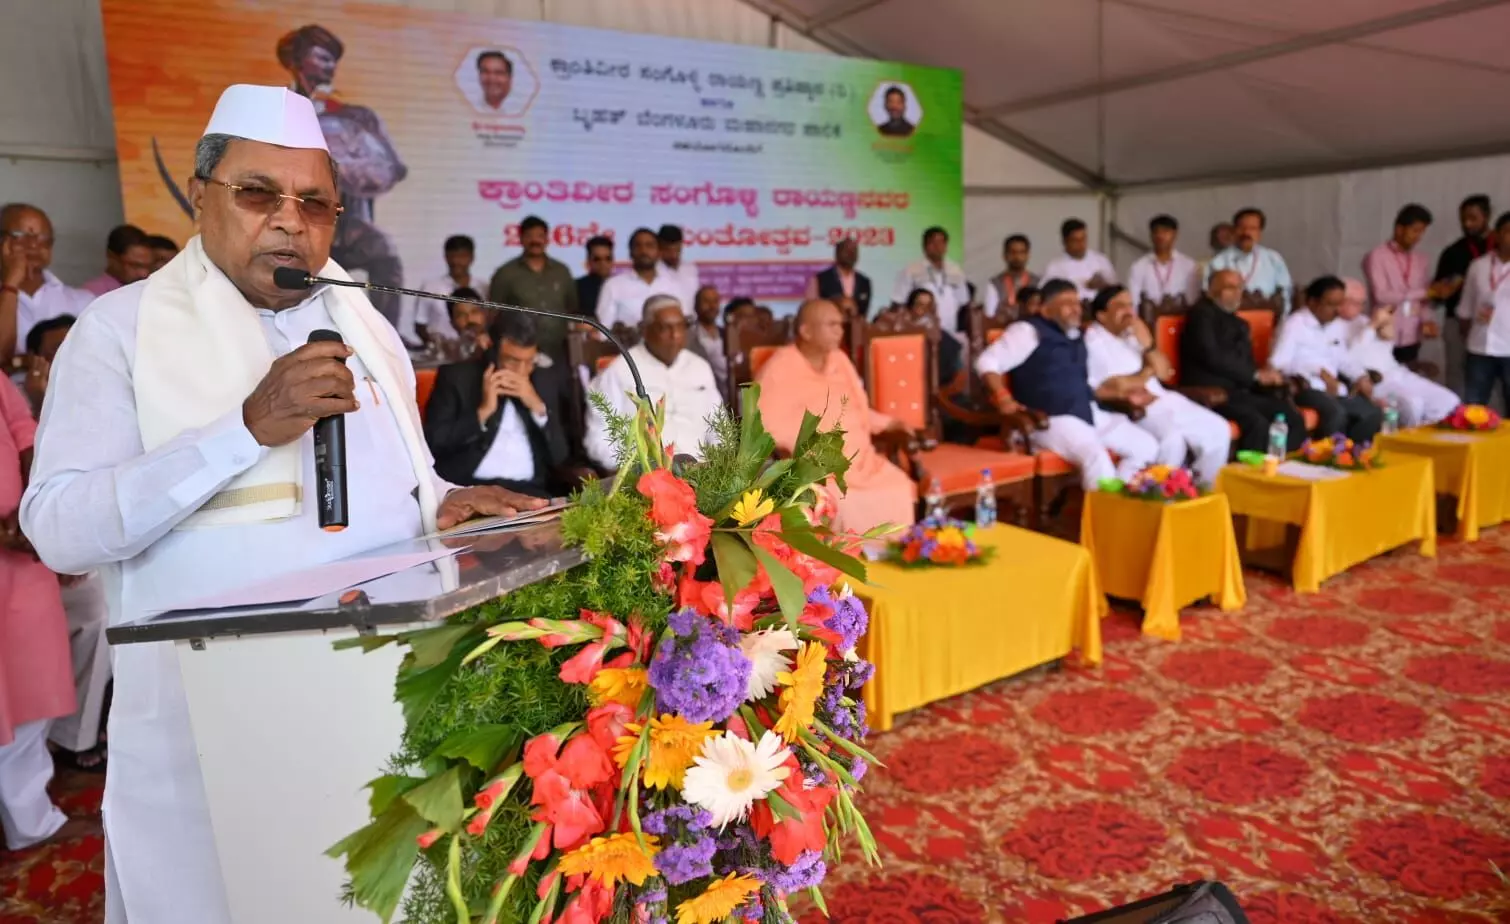 Beware of British agents who humiliate true freedom fighters: CM Siddaramaiah